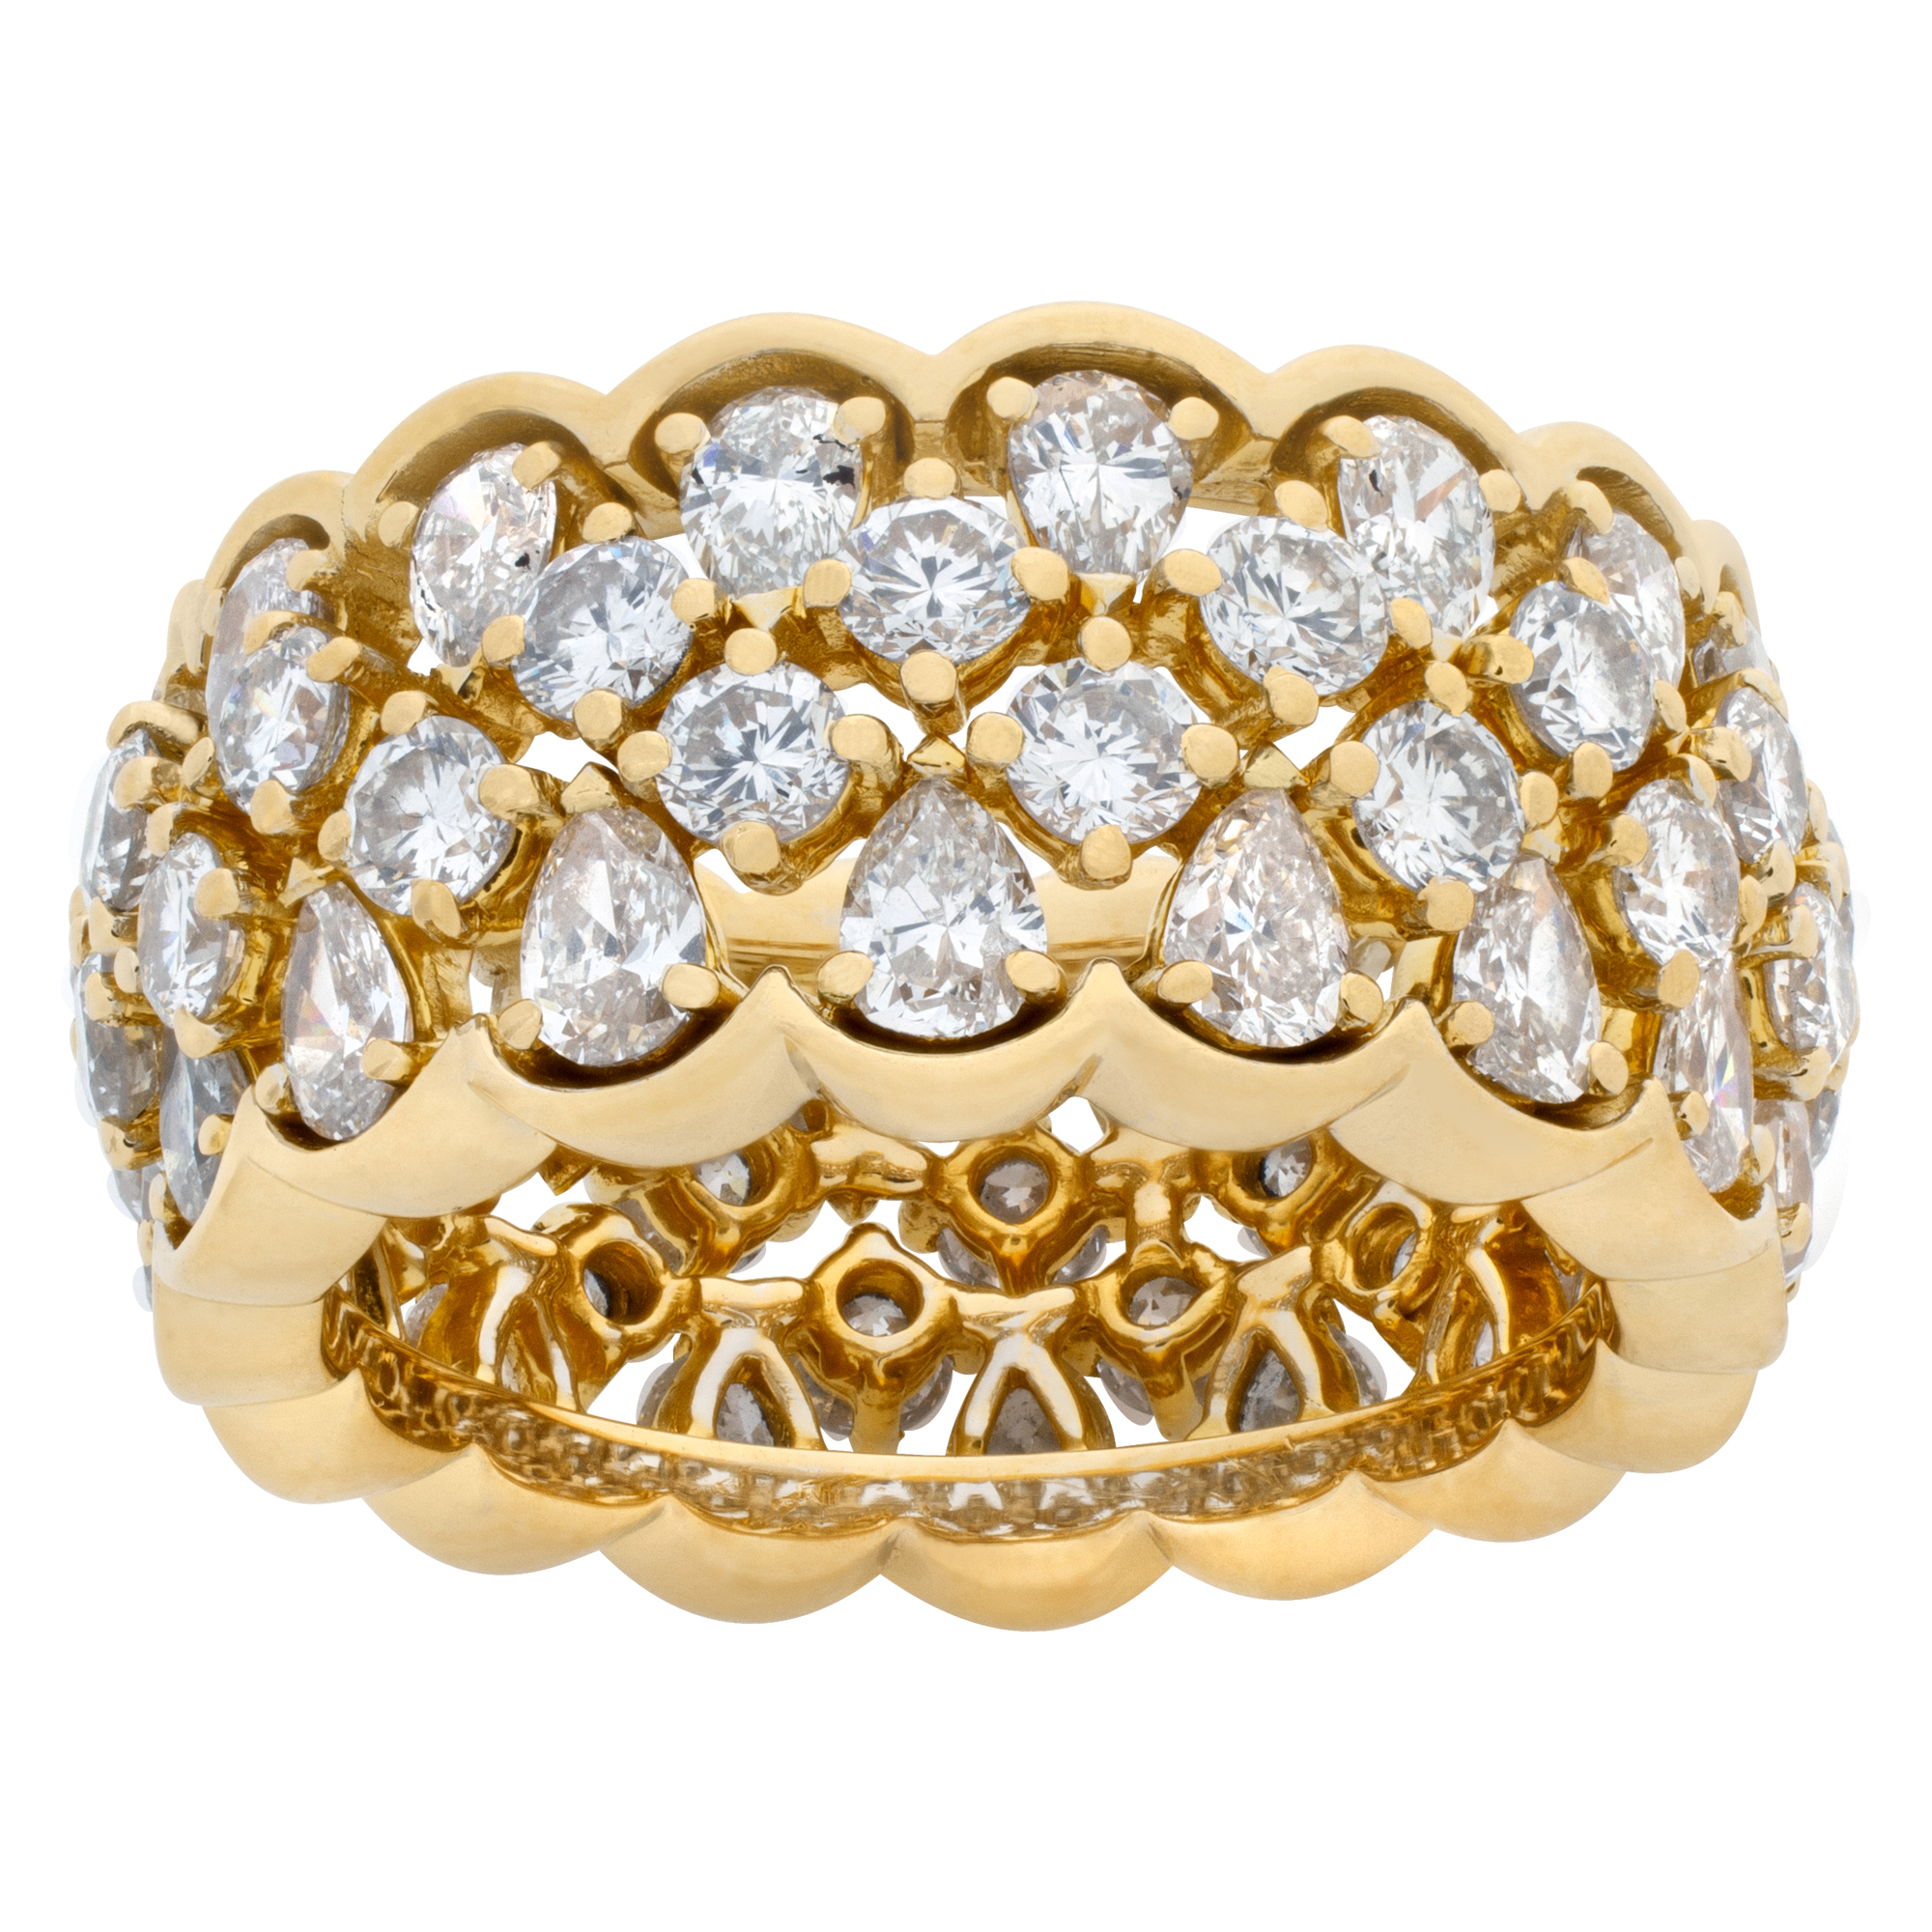 Wide "Eternity"band with approximately 5 carats full cut round brilliant & pear shape diamonds, set in 18K yellow gold